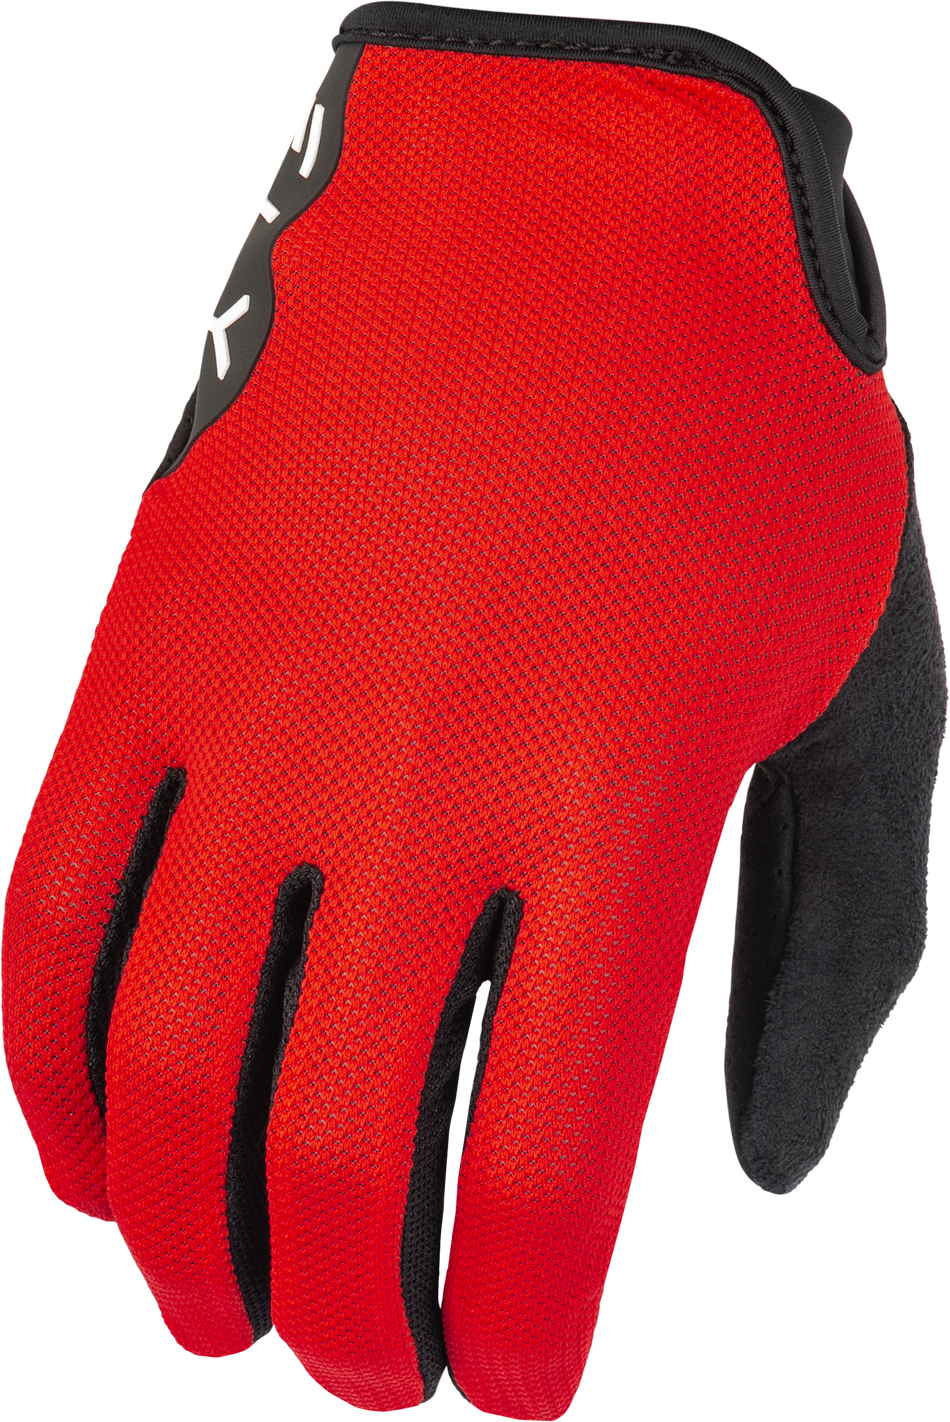 FLY RACING Mesh Gloves Red Sm 375-337S